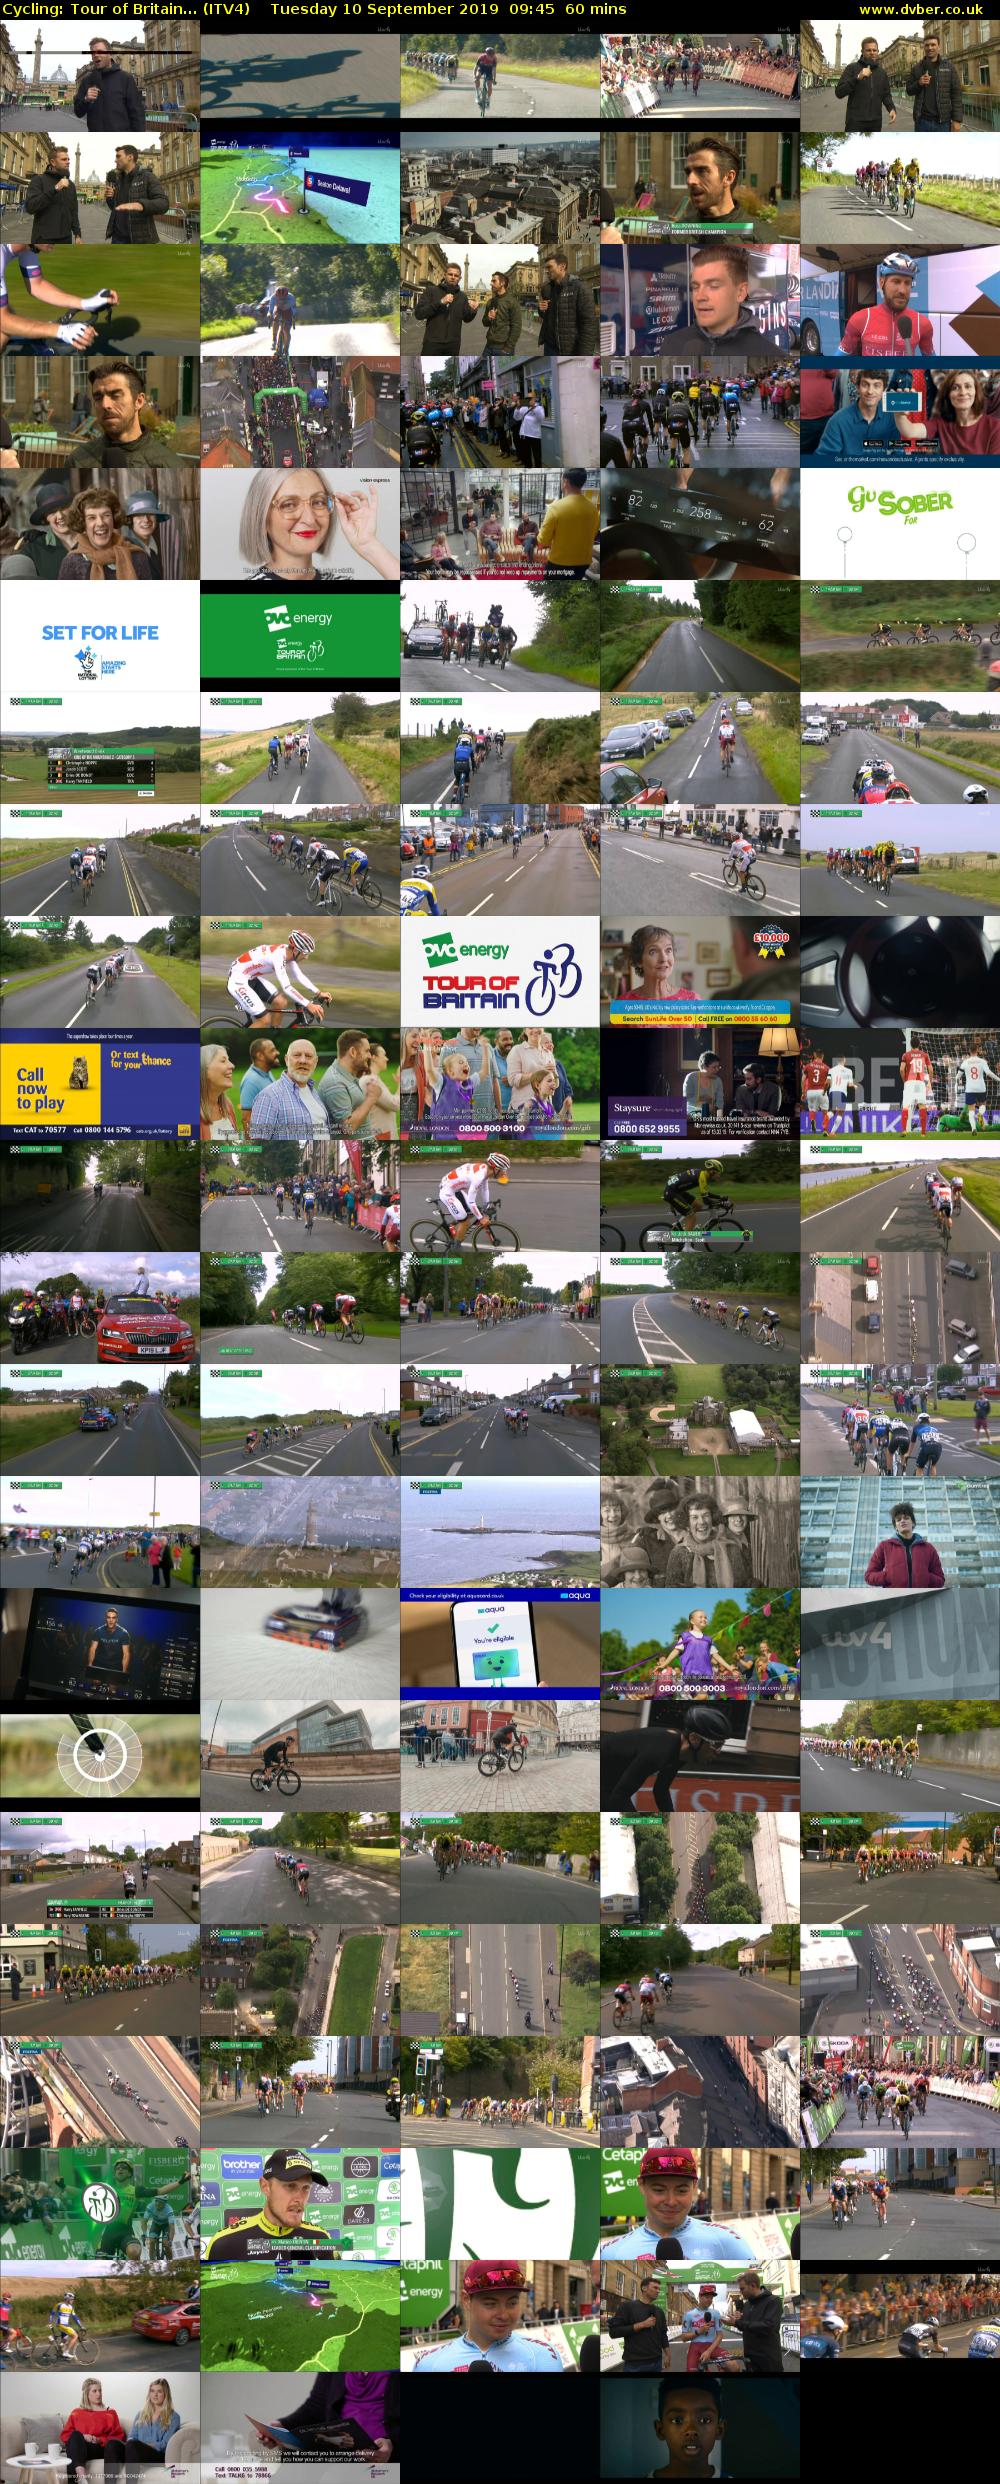 Cycling: Tour of Britain... (ITV4) Tuesday 10 September 2019 09:45 - 10:45